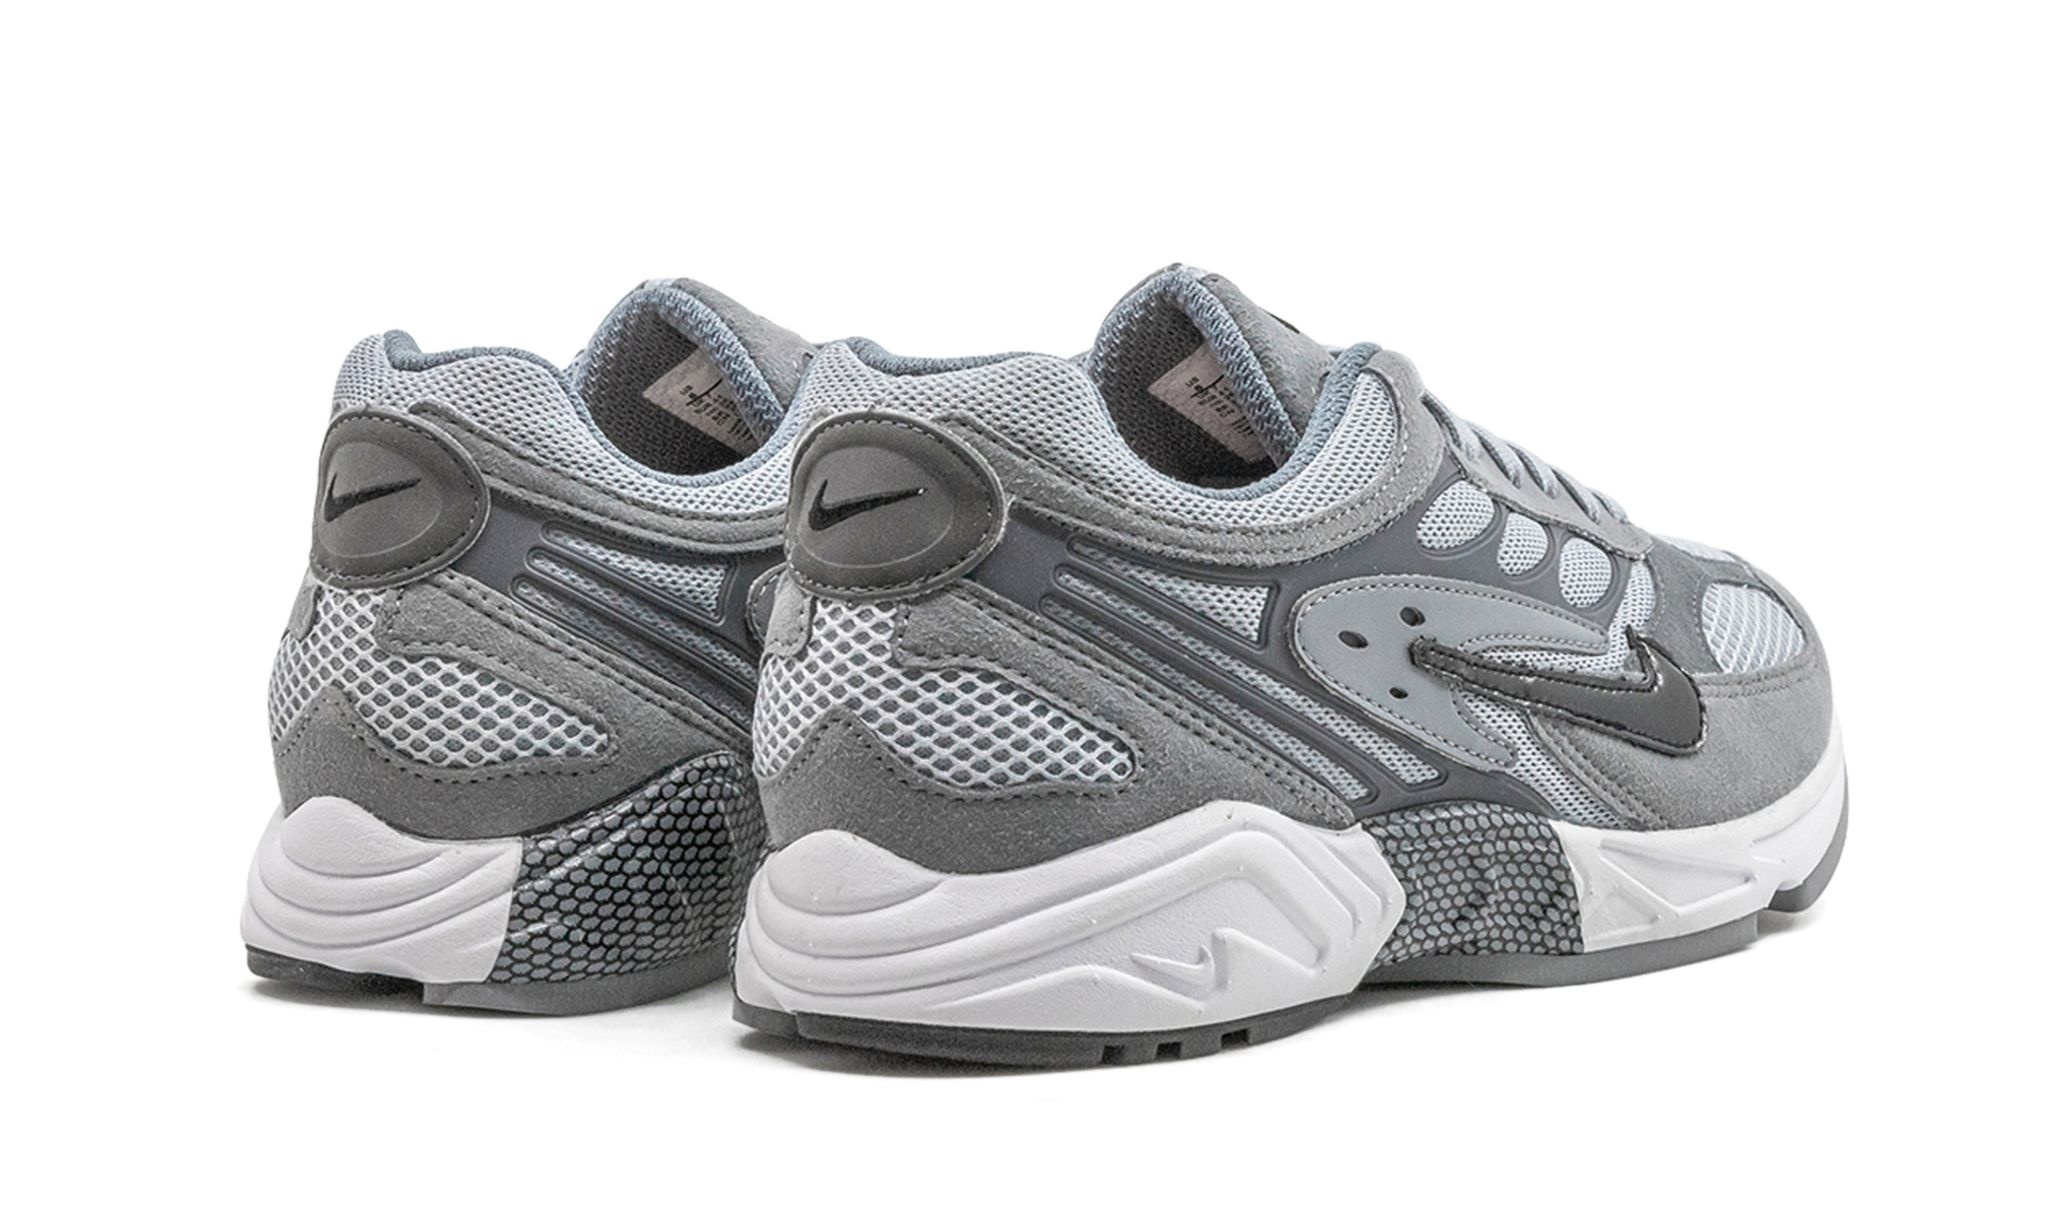 Ghost Racer "Cool Grey" - 3